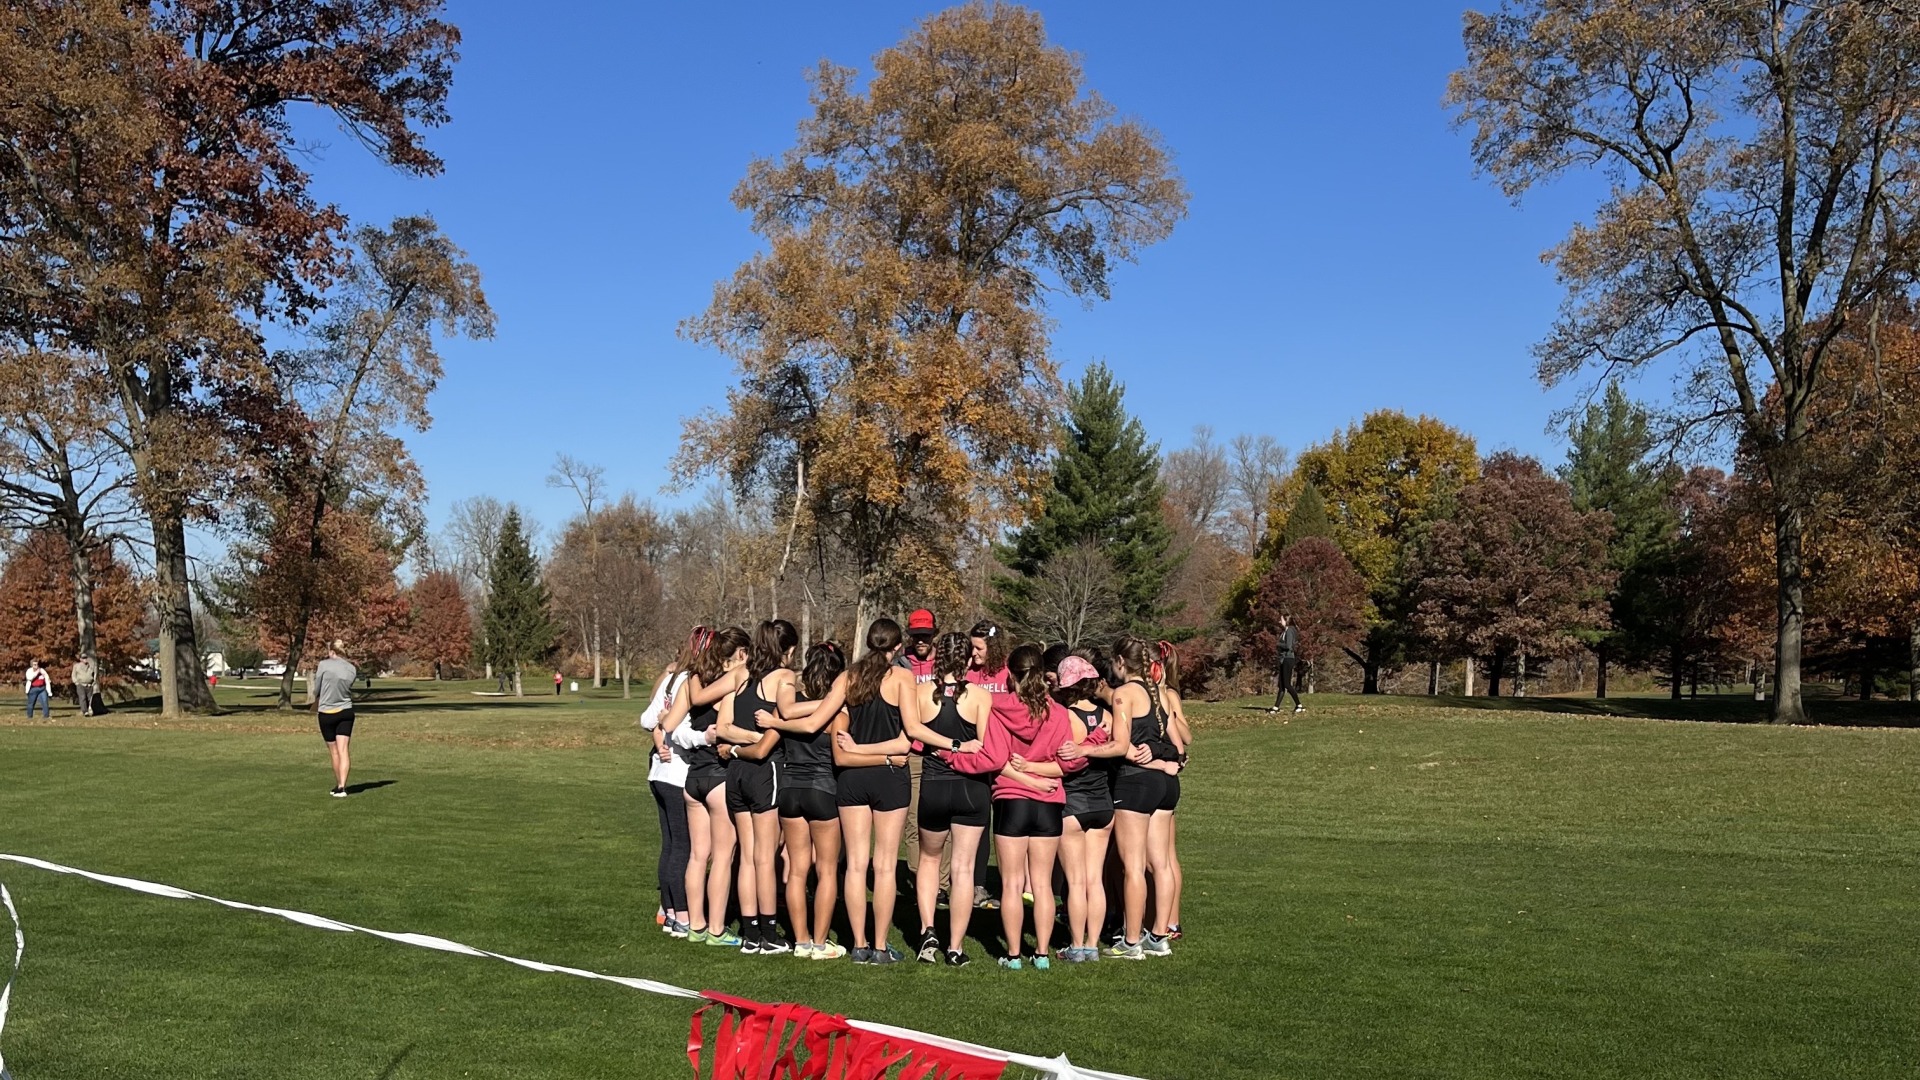 My team (the Bea$ts) huddles together on the grass before an XC meet